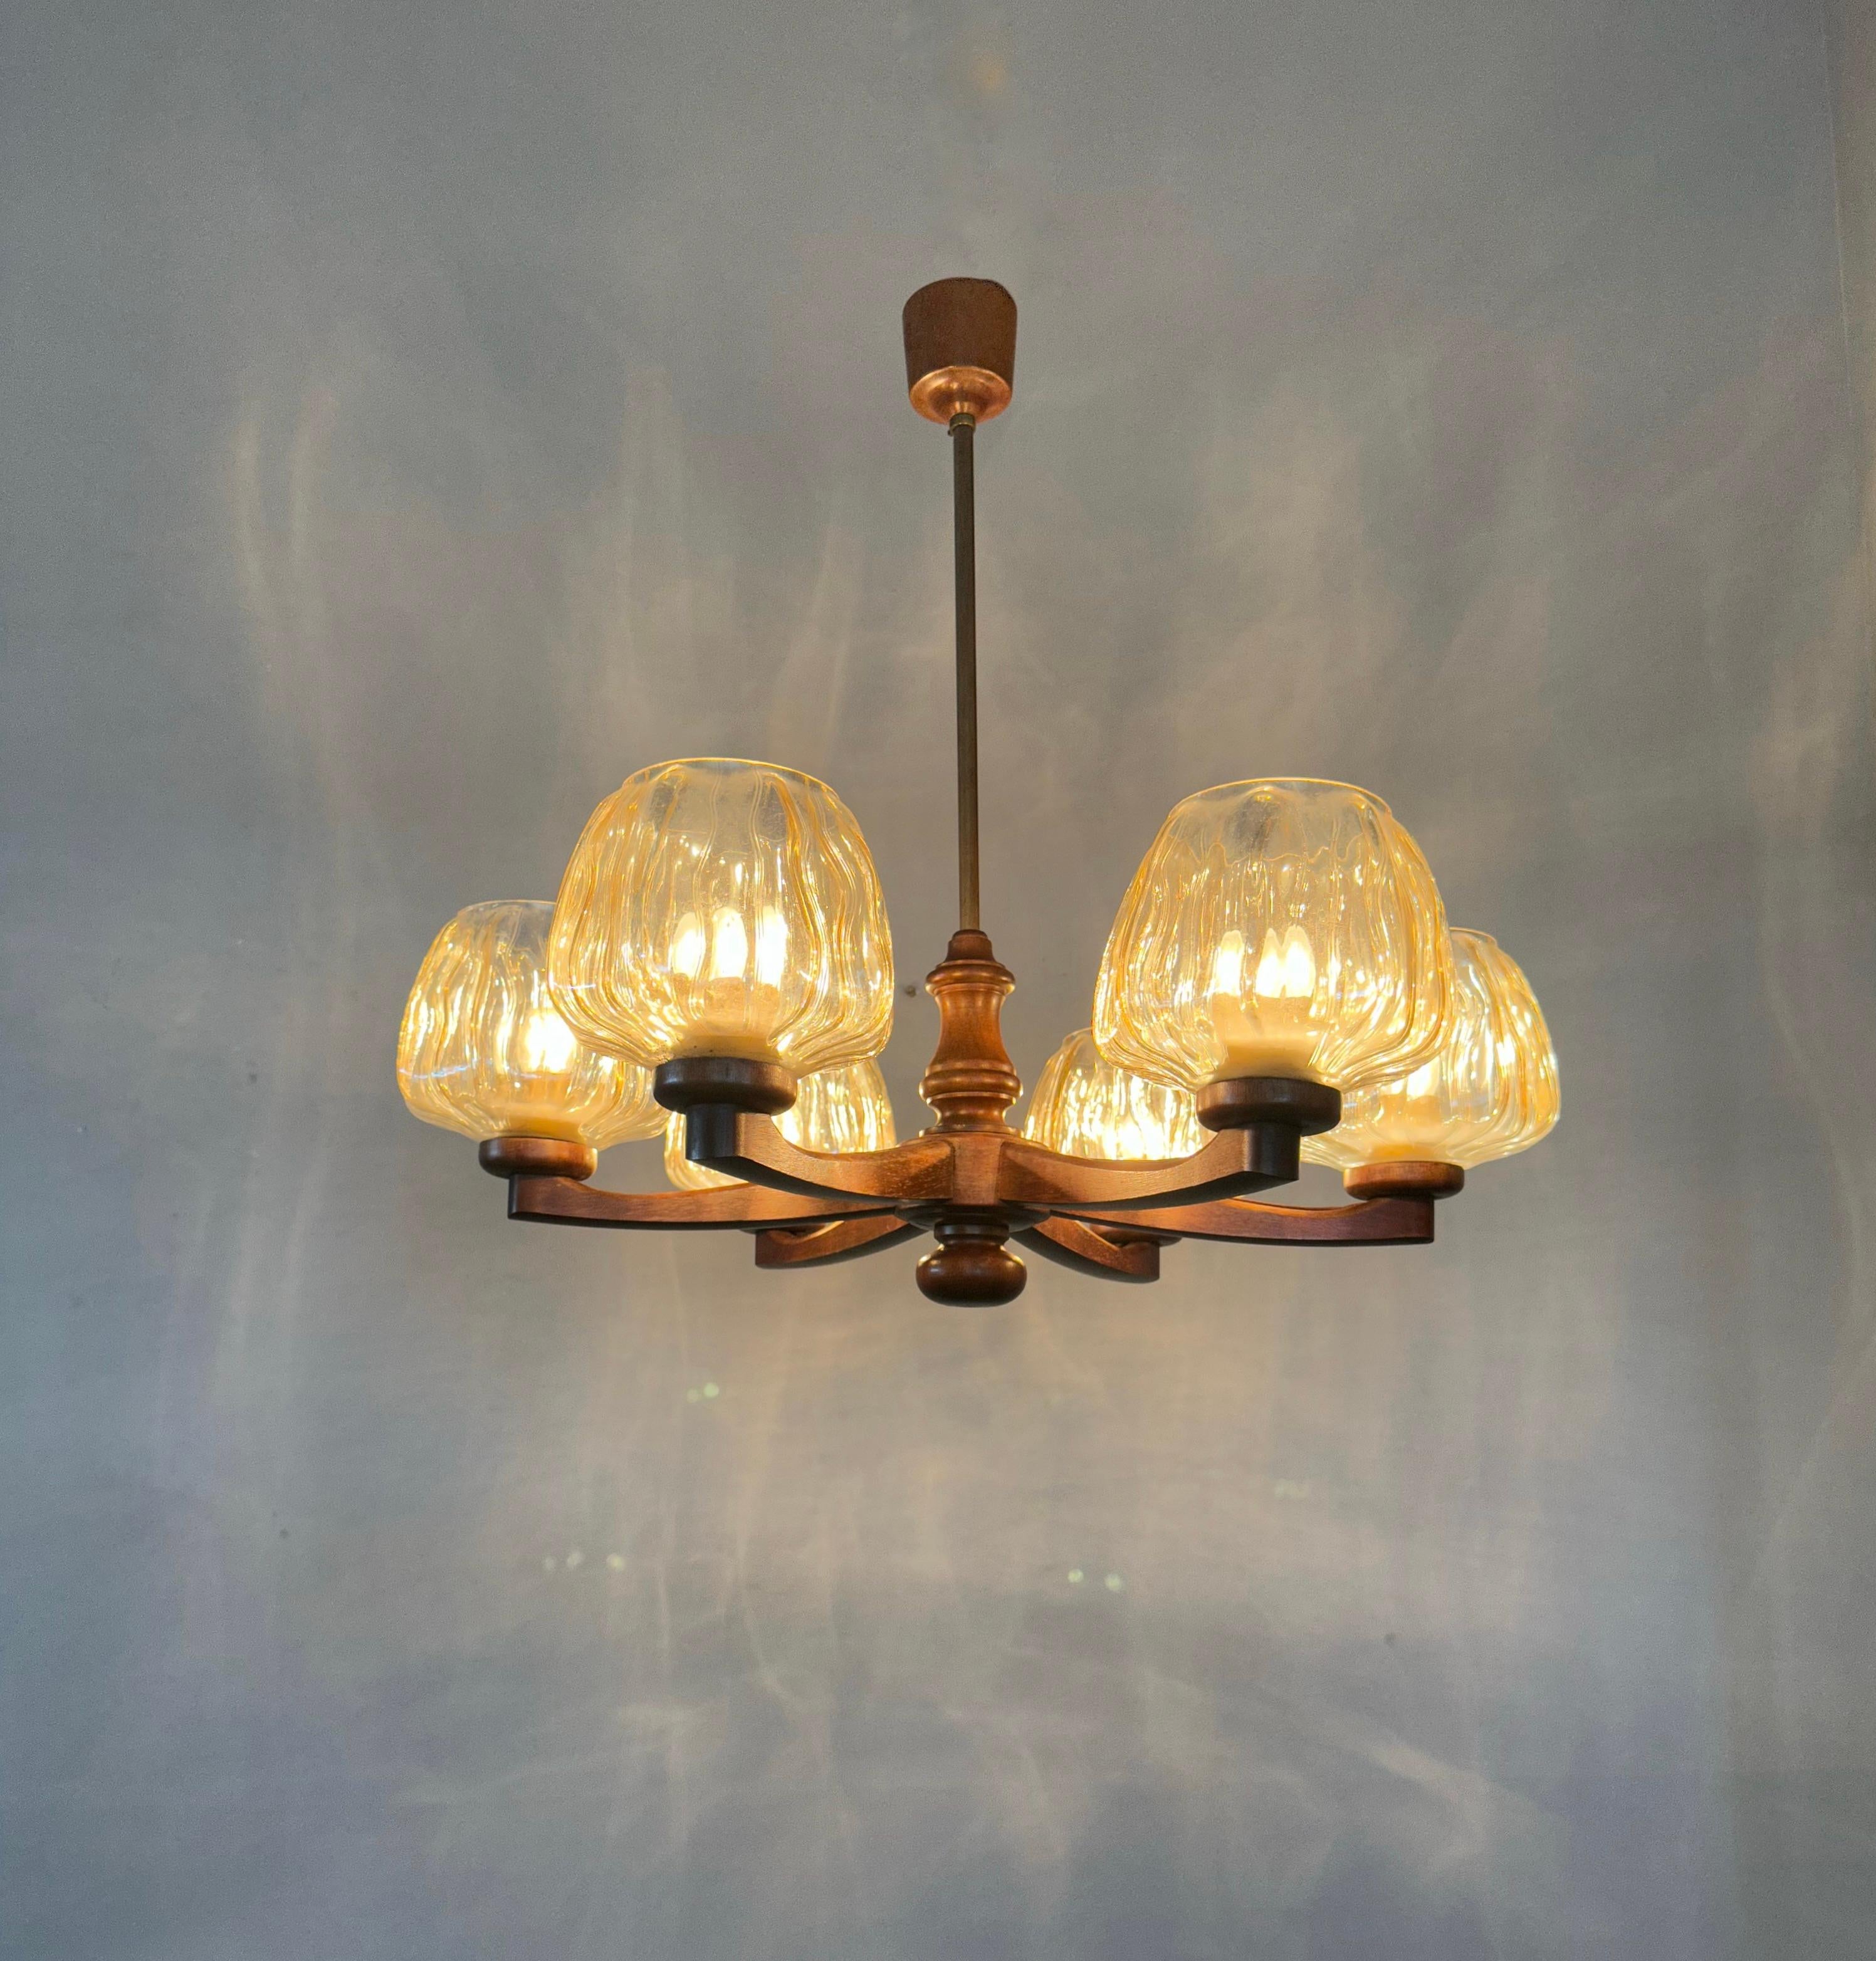 Sophisticated Mid-Century Modern 6 Light Chandelier with Art Glass Shades 1960s For Sale 2